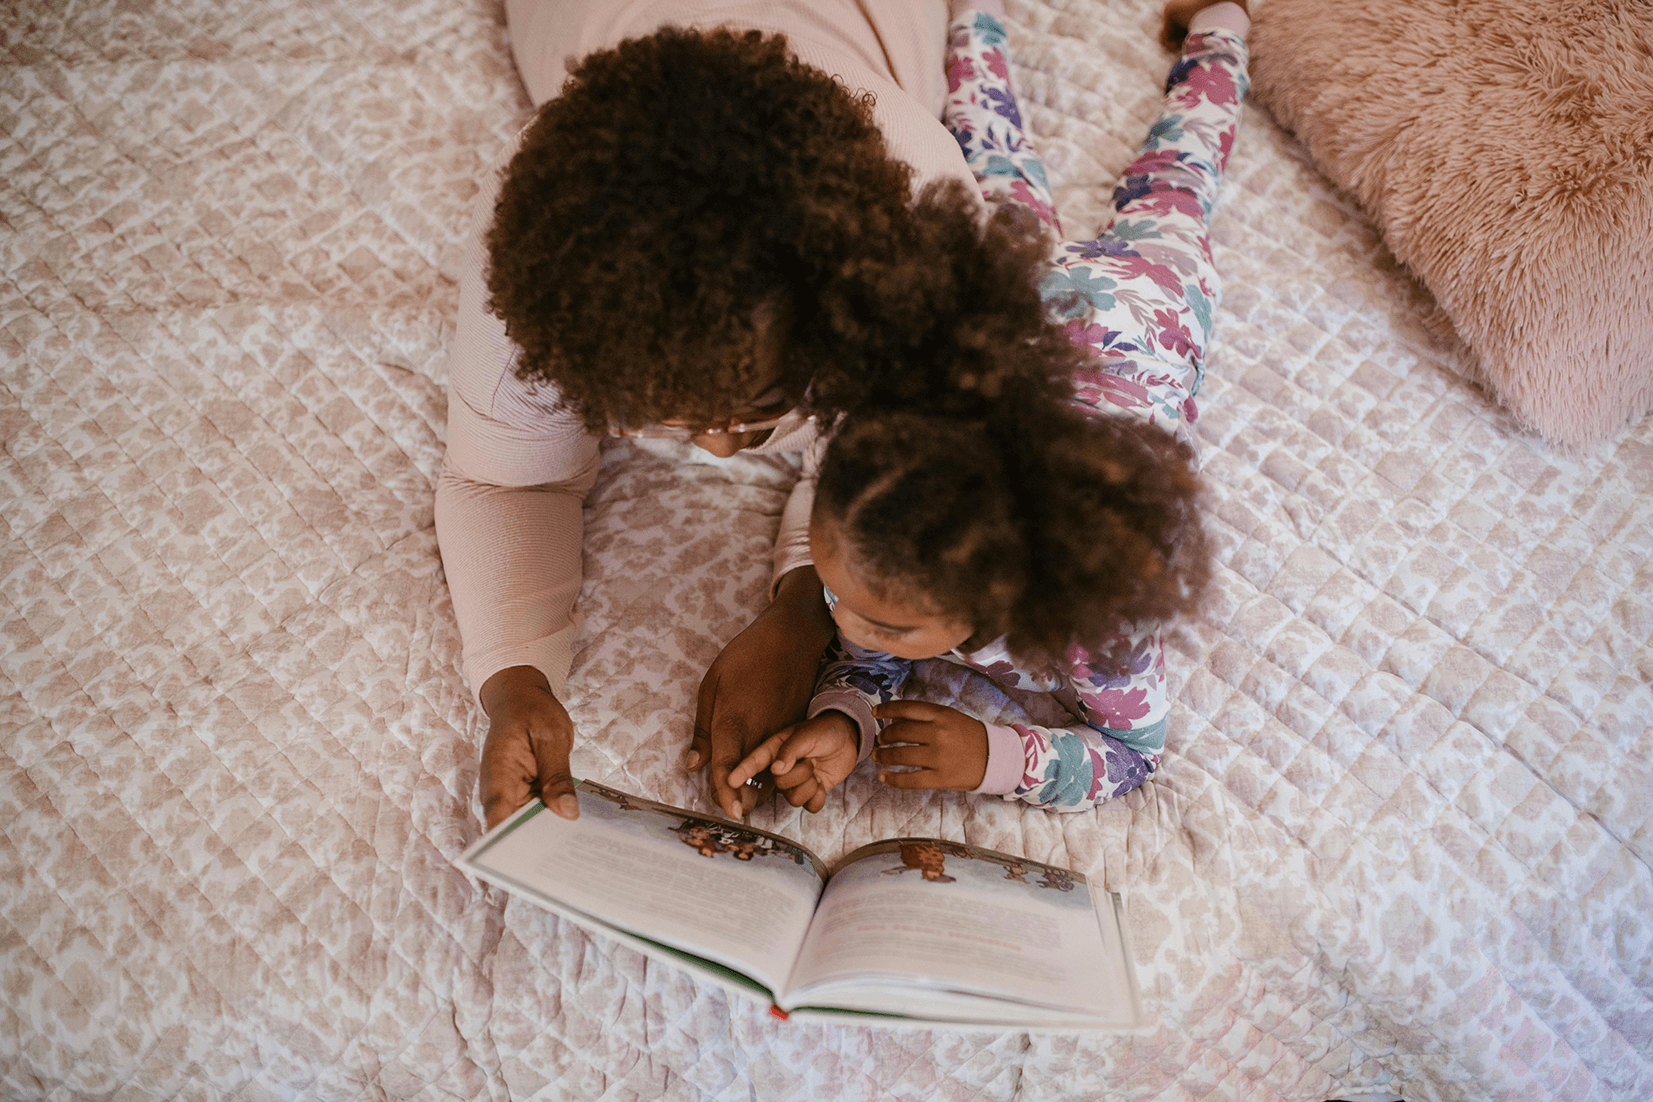 A mom and daughter reading a book together on a bed.